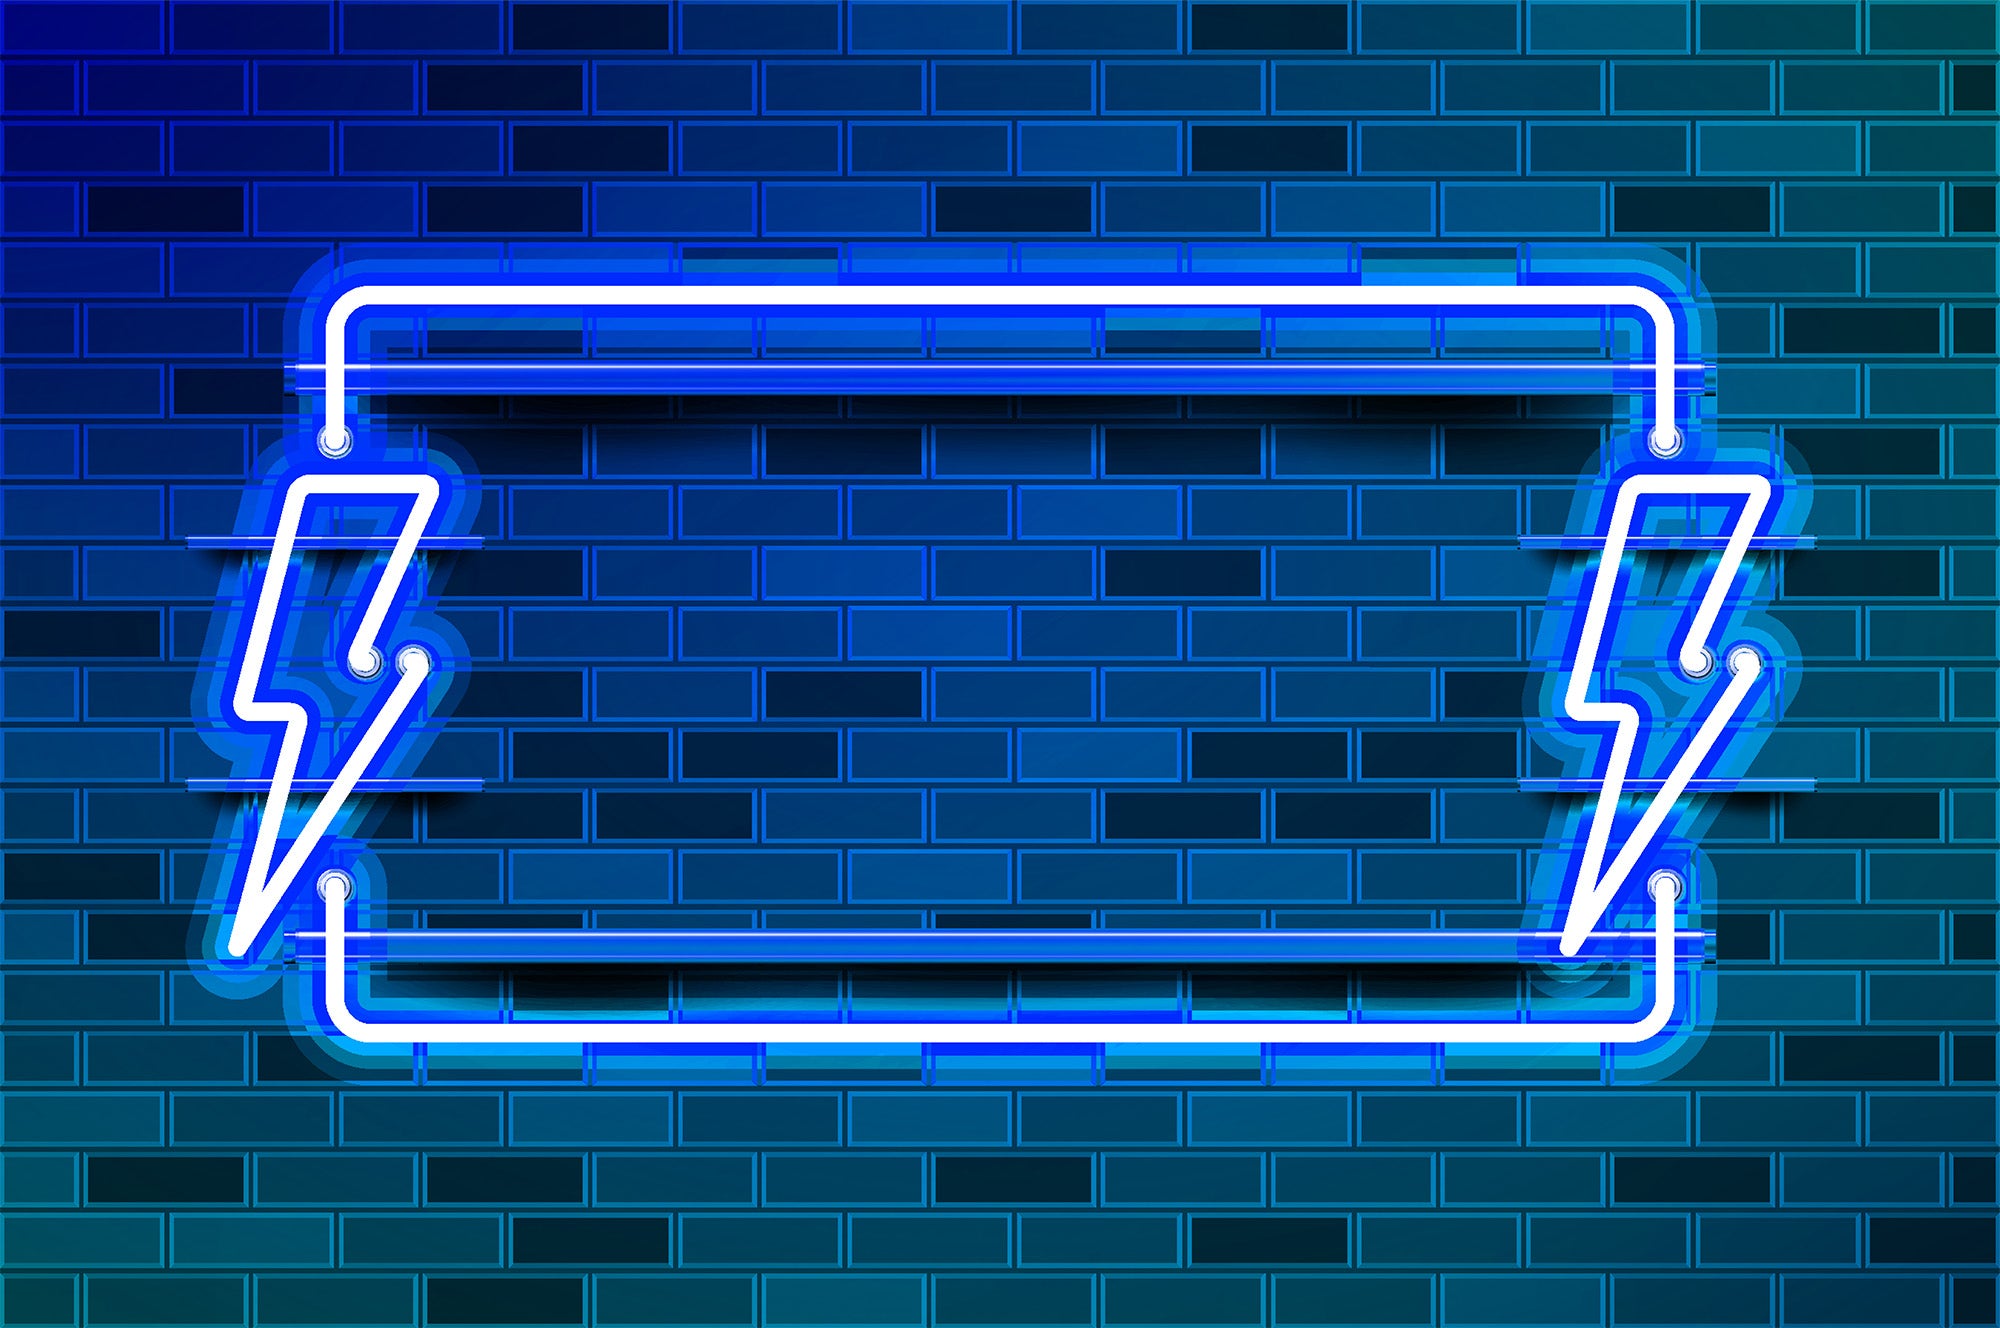 Blue LED lights in the shape of lightning bolts against a brick wall.